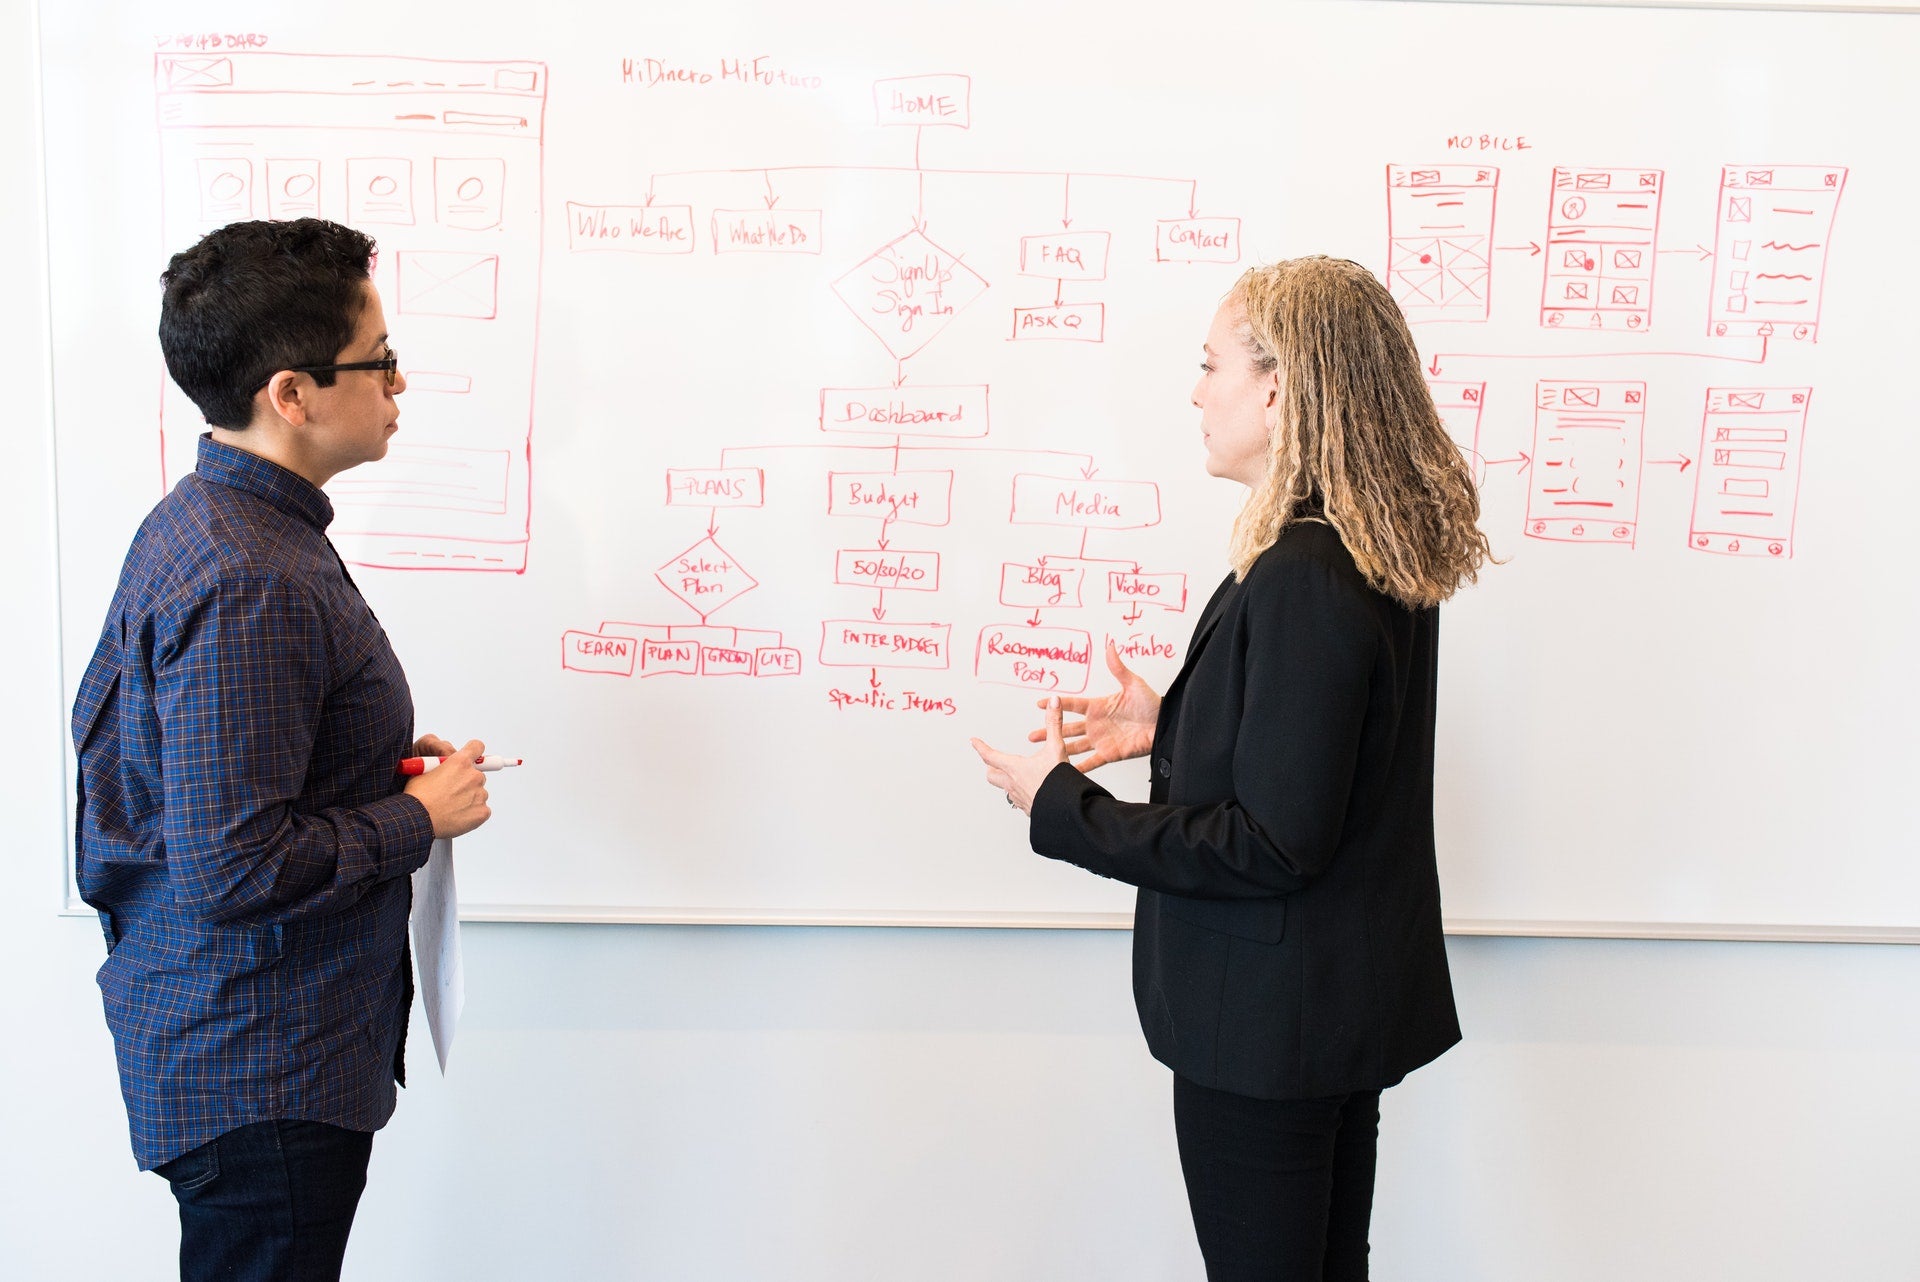 Image of a man and woman standing next a white board discussing the detailed marketing tactics written on the board